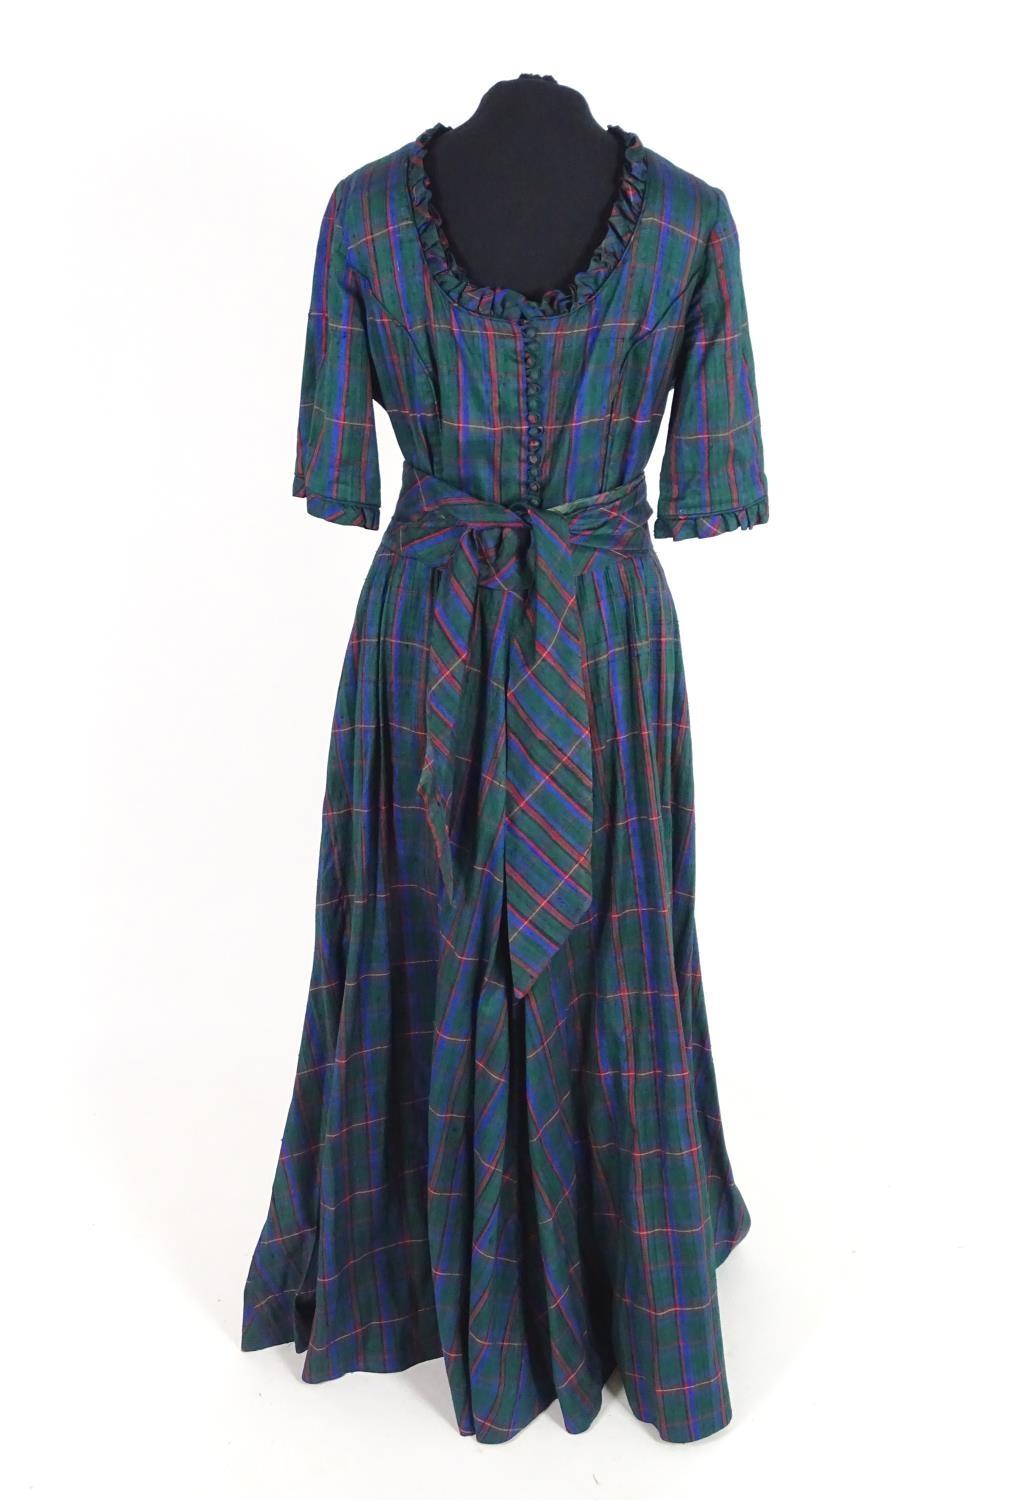 Vintage bespoke full length outfits. A taffeta evening dress, circa 1980's, green with check